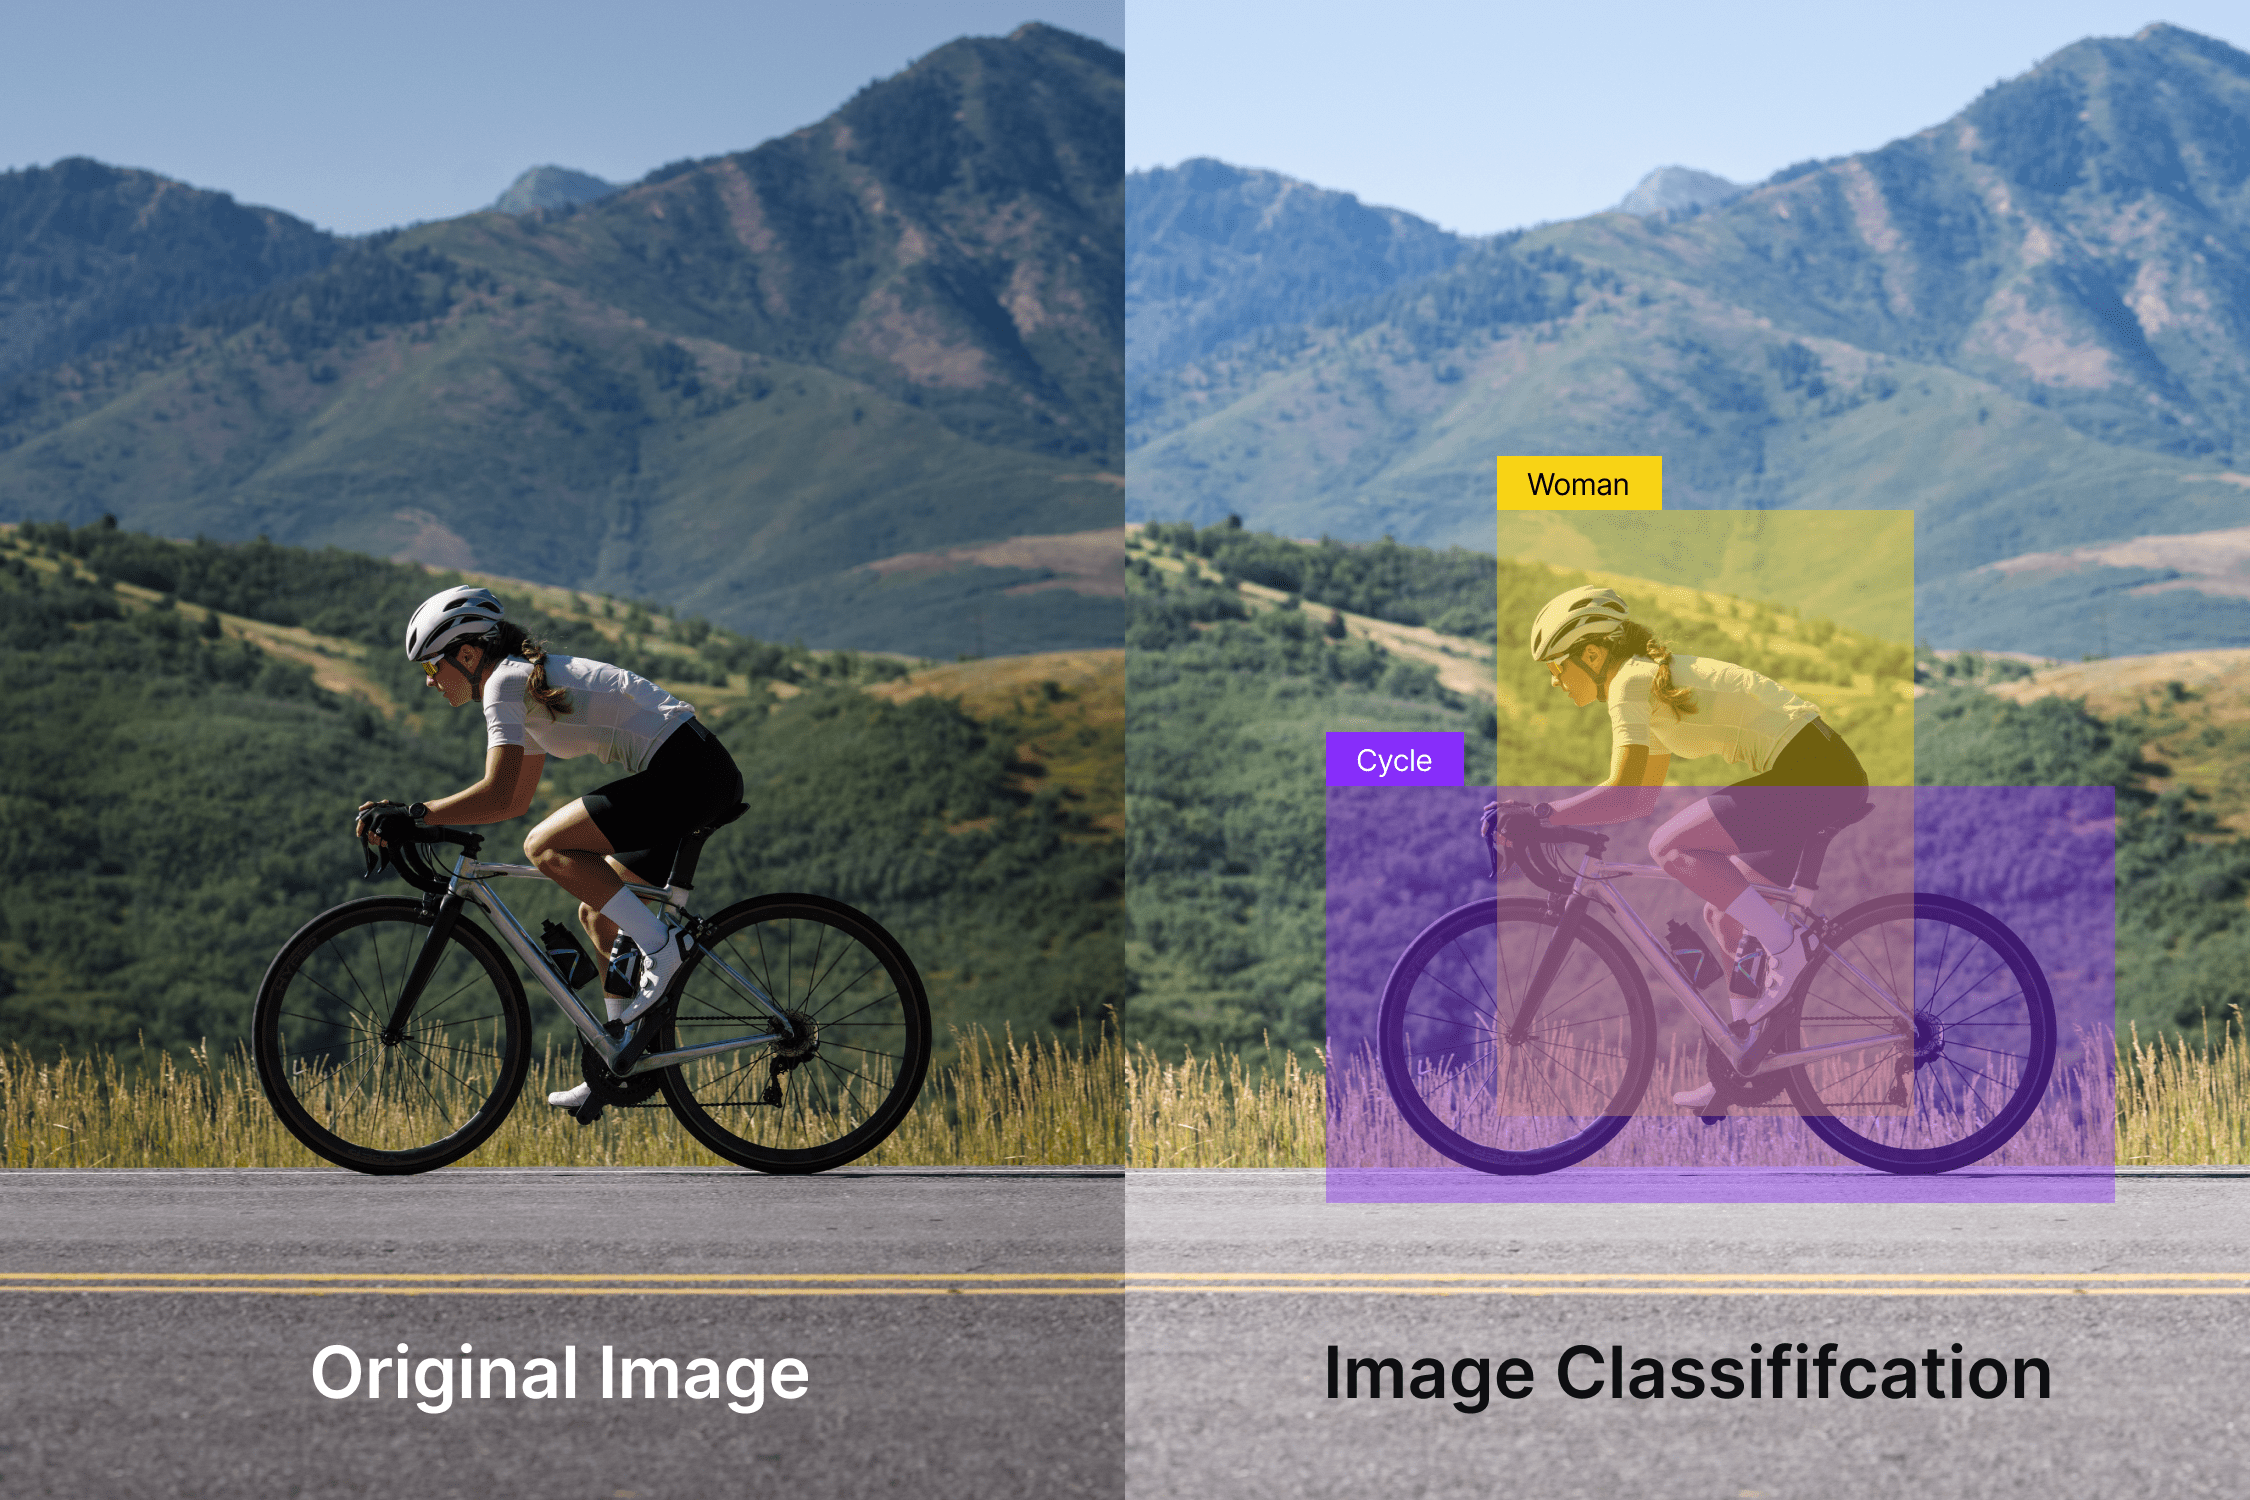 image classification applications